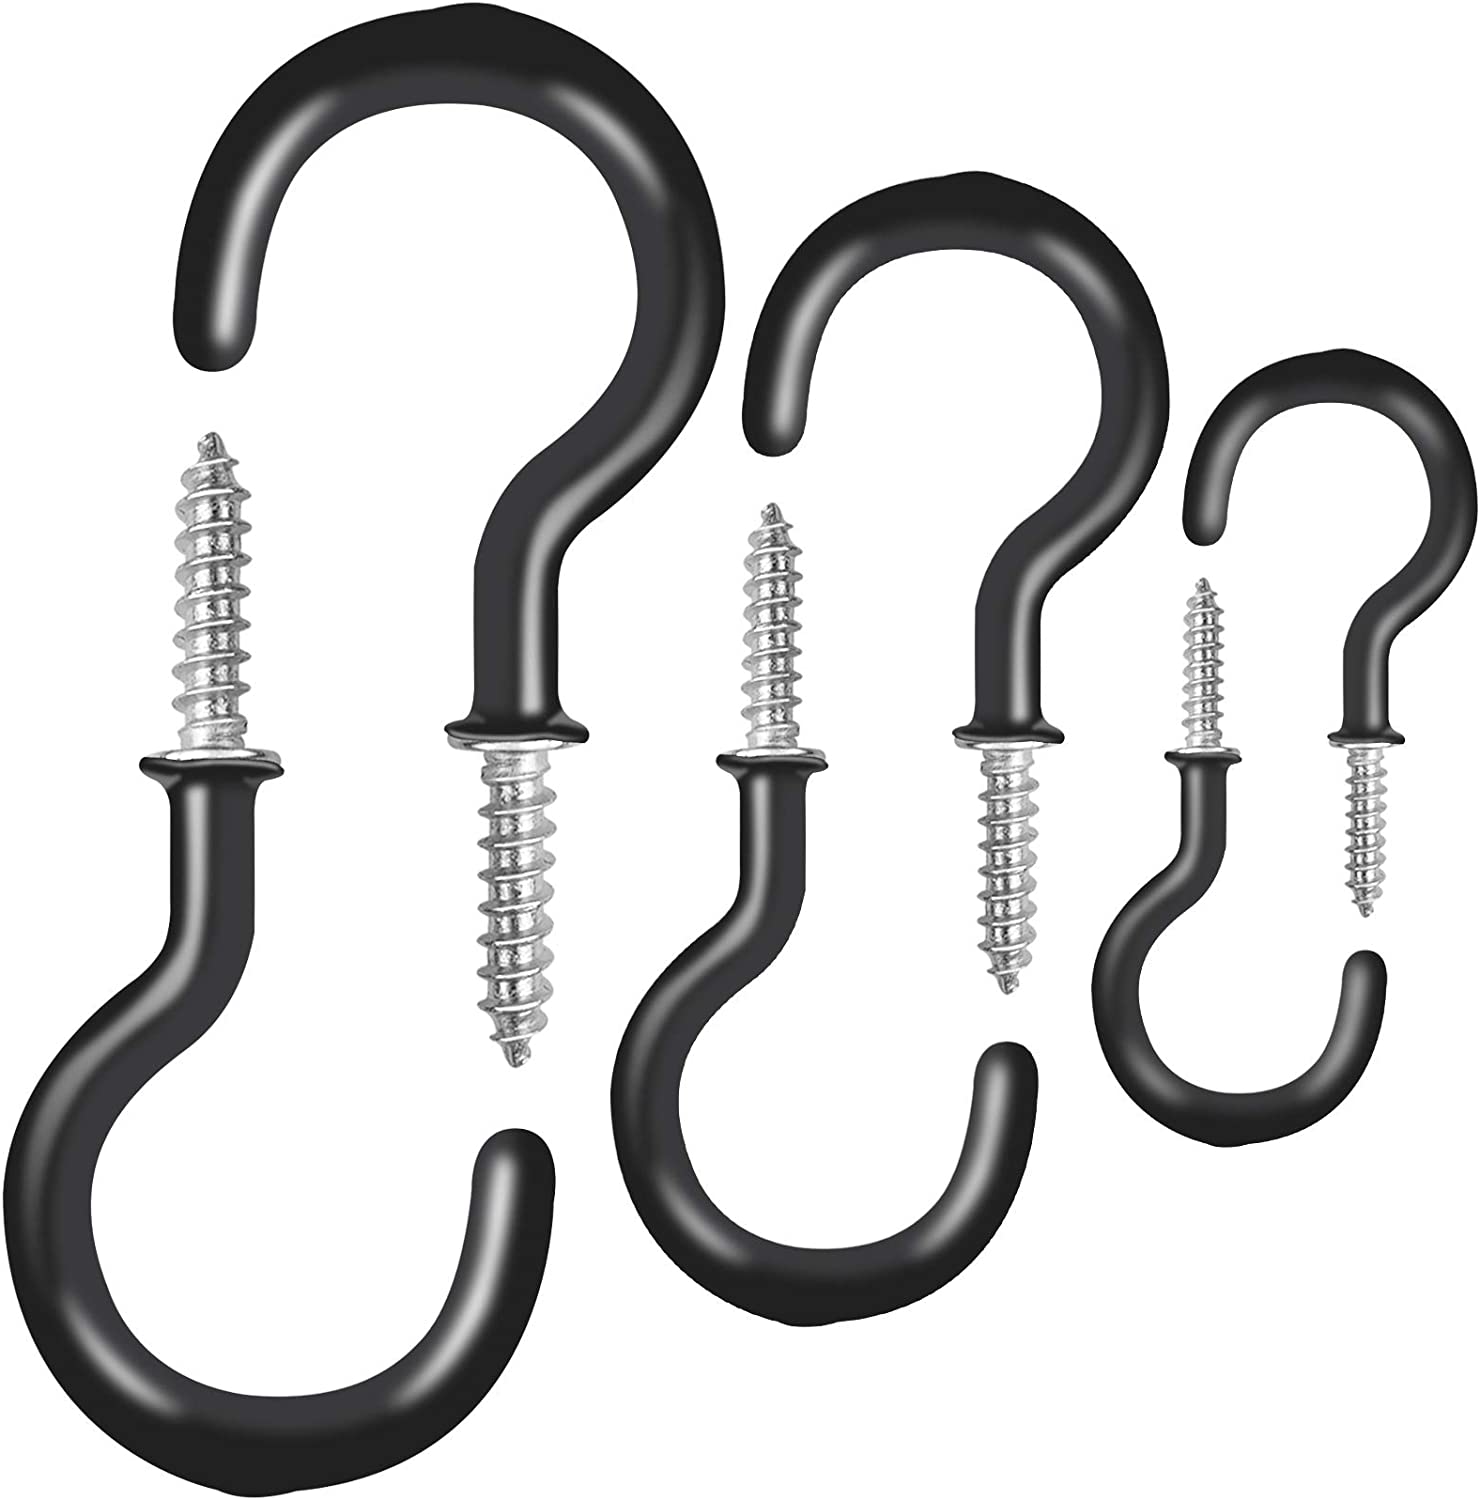 SUKIA 25 PCS Black Small Cup Screw Hooks Ceiling Hooks for Hanging Lights Vinyl Coated Steel Metal Cup Hooks Holder Christmas Light Hangers Suitble for Indoor and Outdoor Hooks Kit (Black-25Pcs) : Home & Kitchen